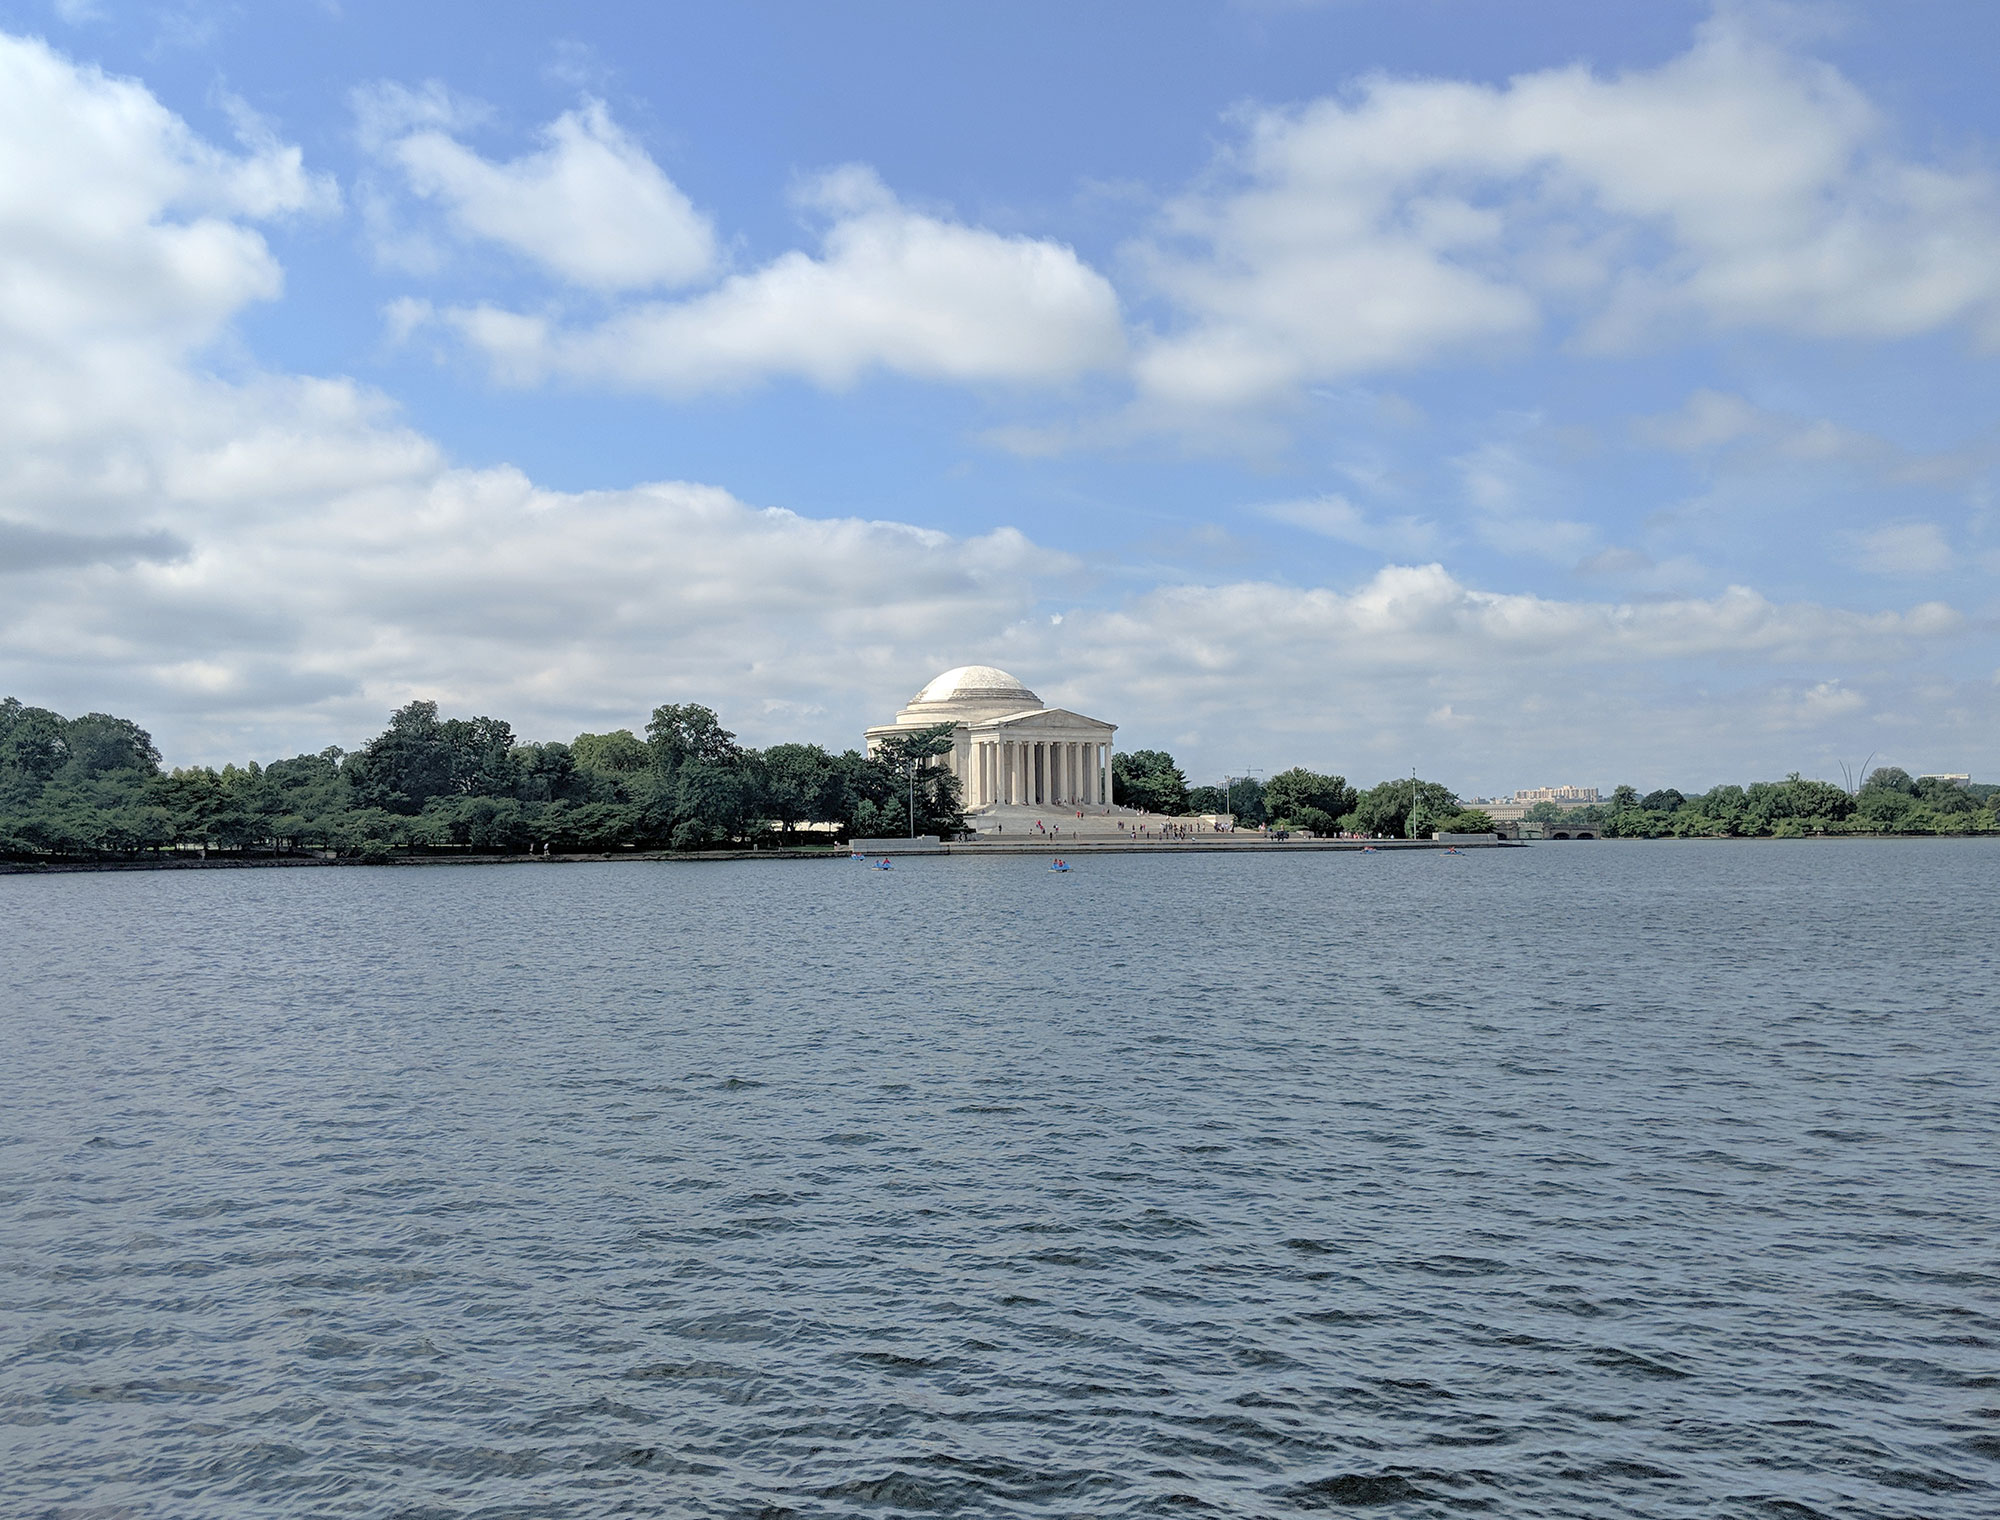 The Thomas Jefferson Memorial from across the Tidal Basin.